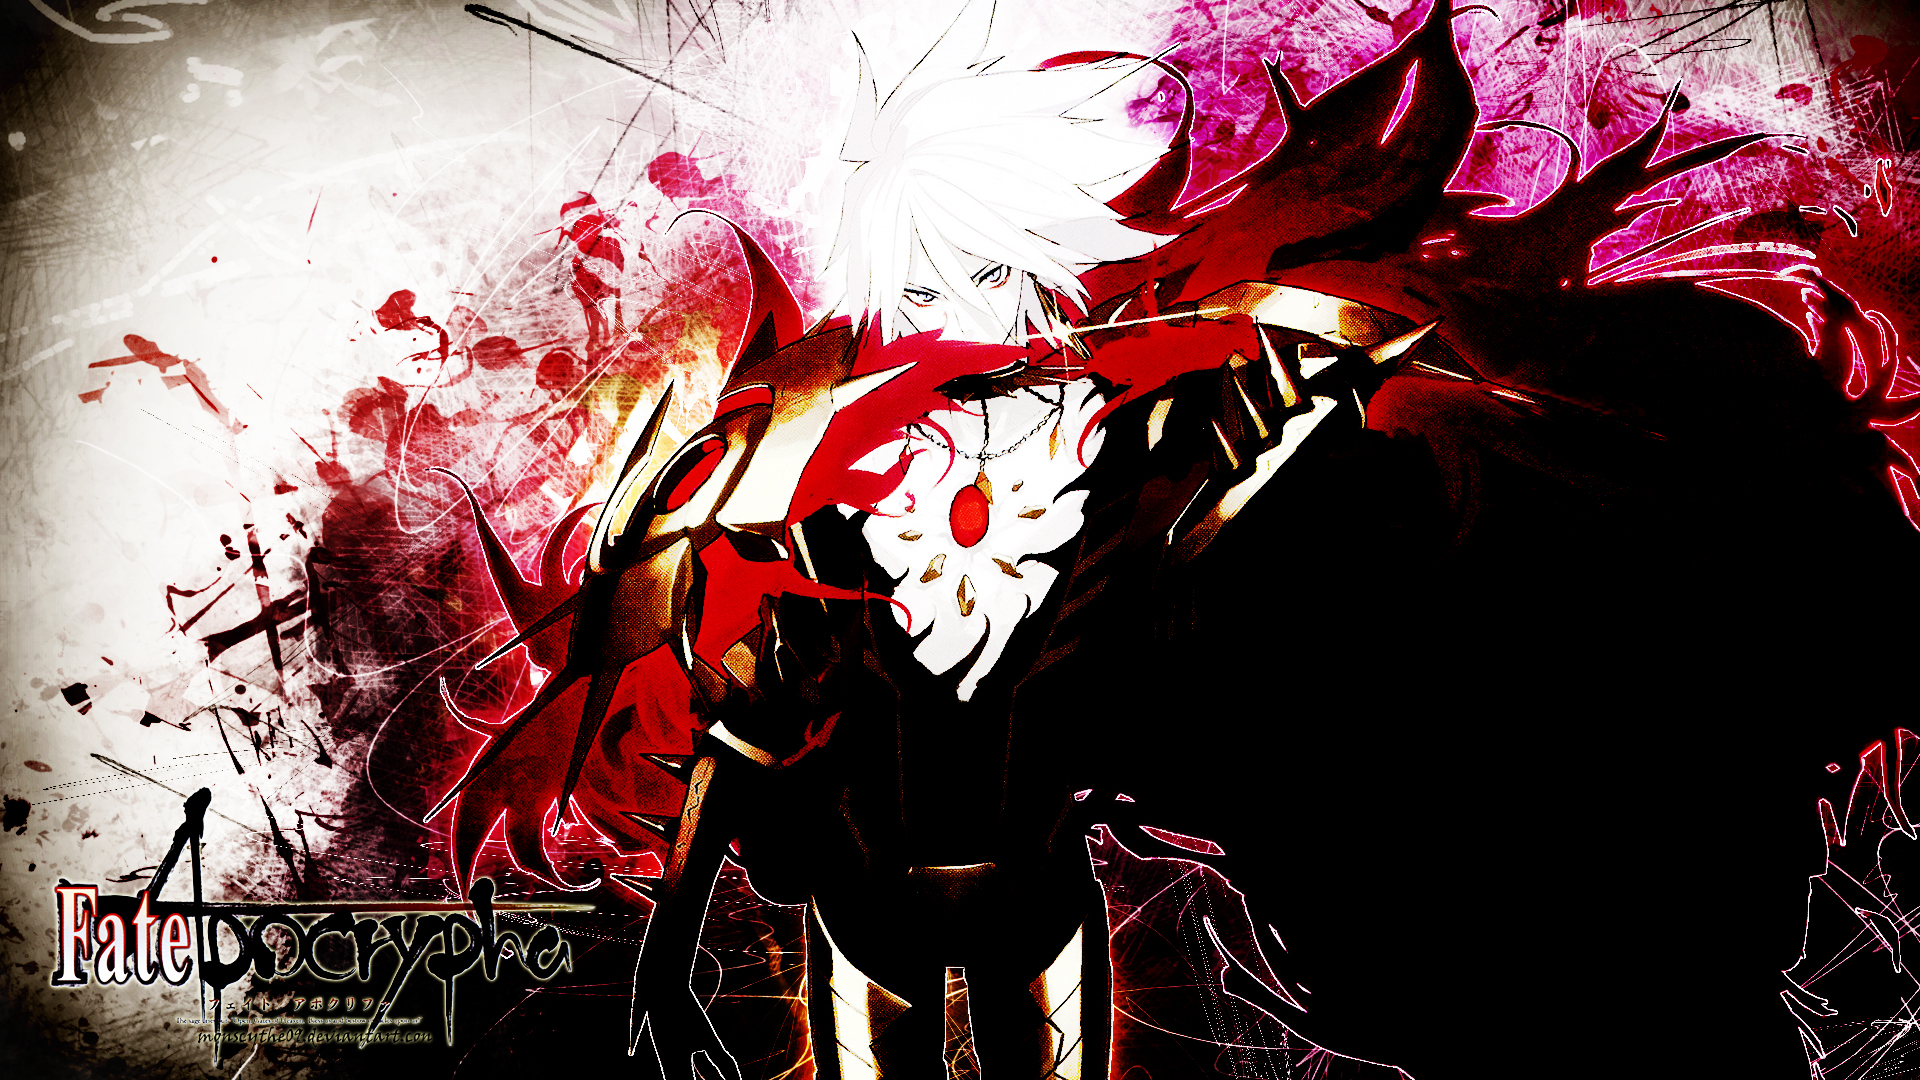 Lancer Of Red Fate Apocrypha 1920x1080